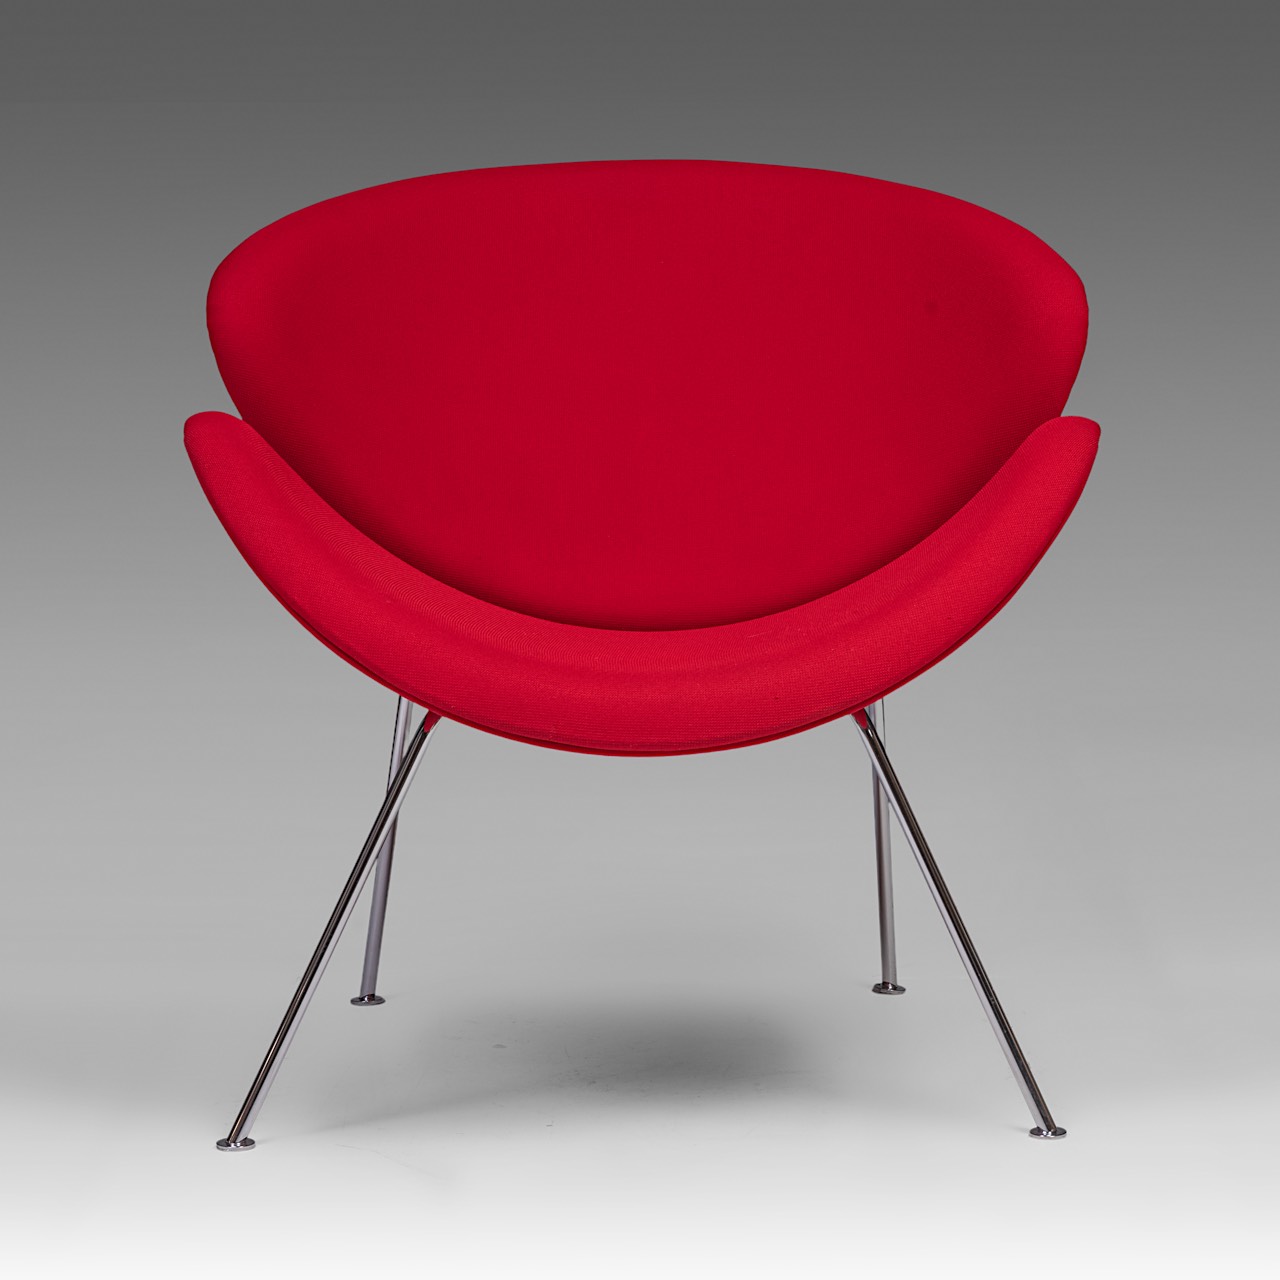 An Orange Slice chair by Pierre Pauline for Artifort, H 85 - W 82 cm - Image 3 of 9